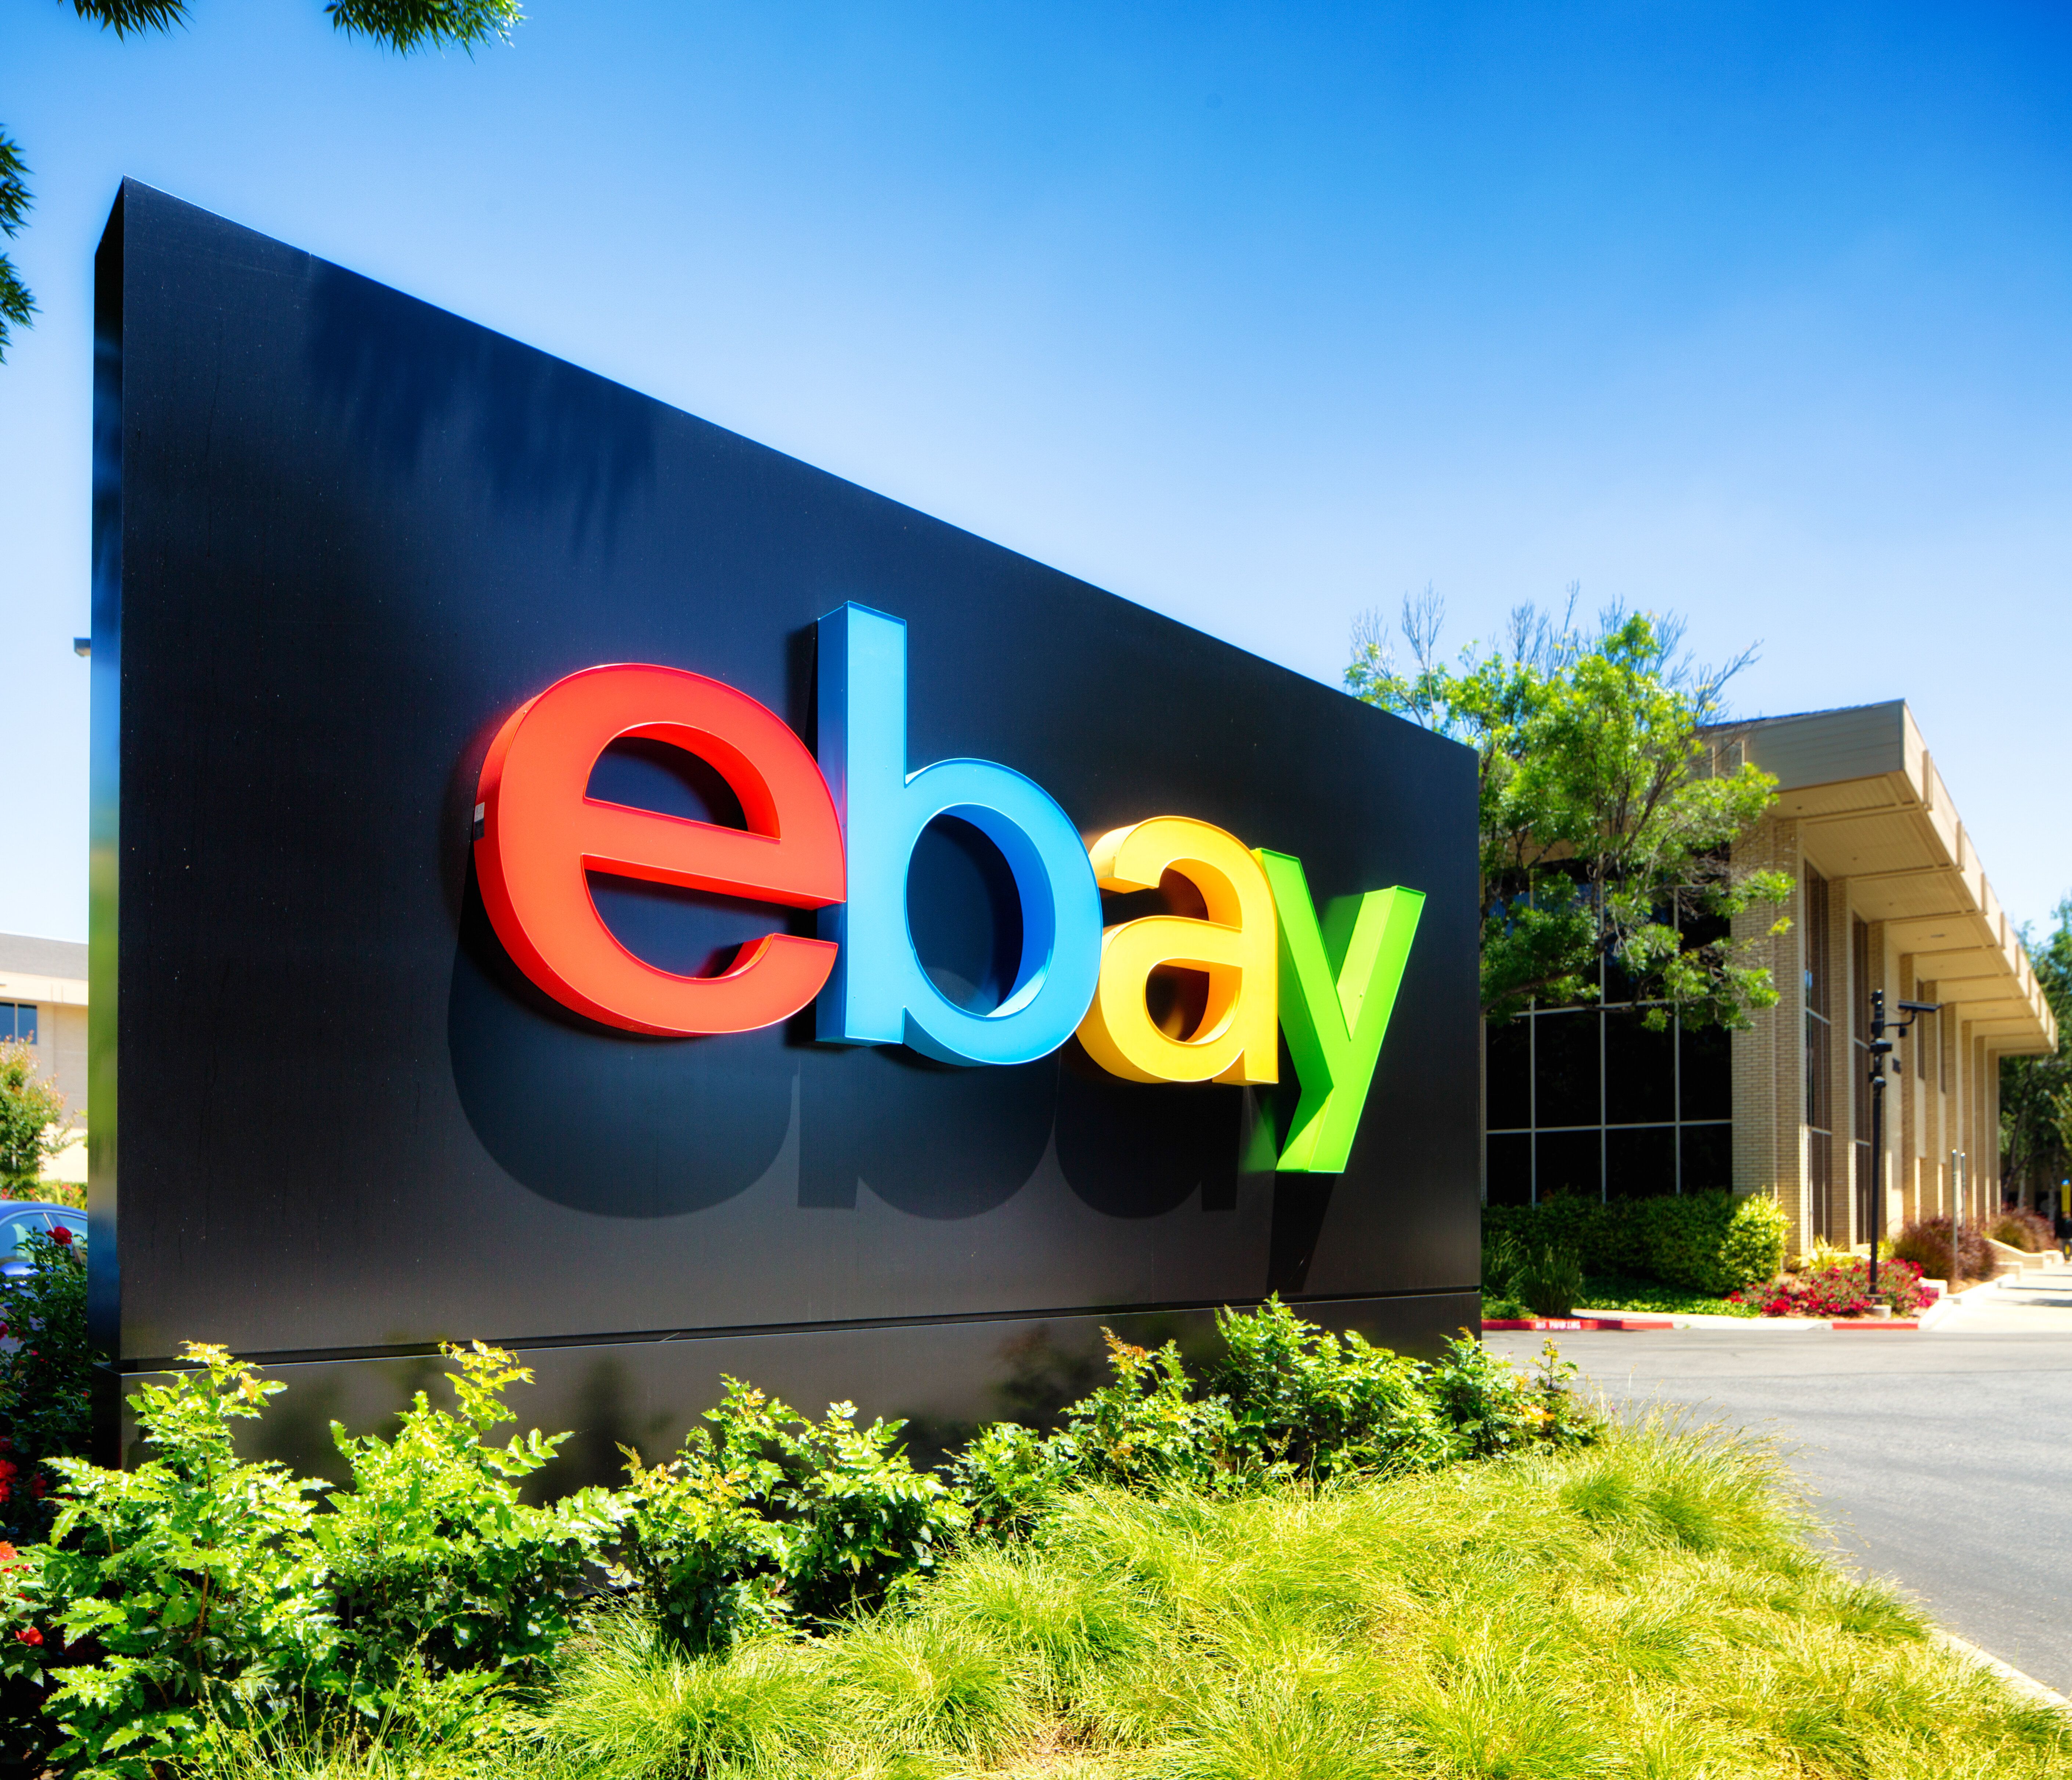 San Jose, USA - May 9, 2016: Ebay south campus entrance sign in San Jose California. Oblique view with campus building behind